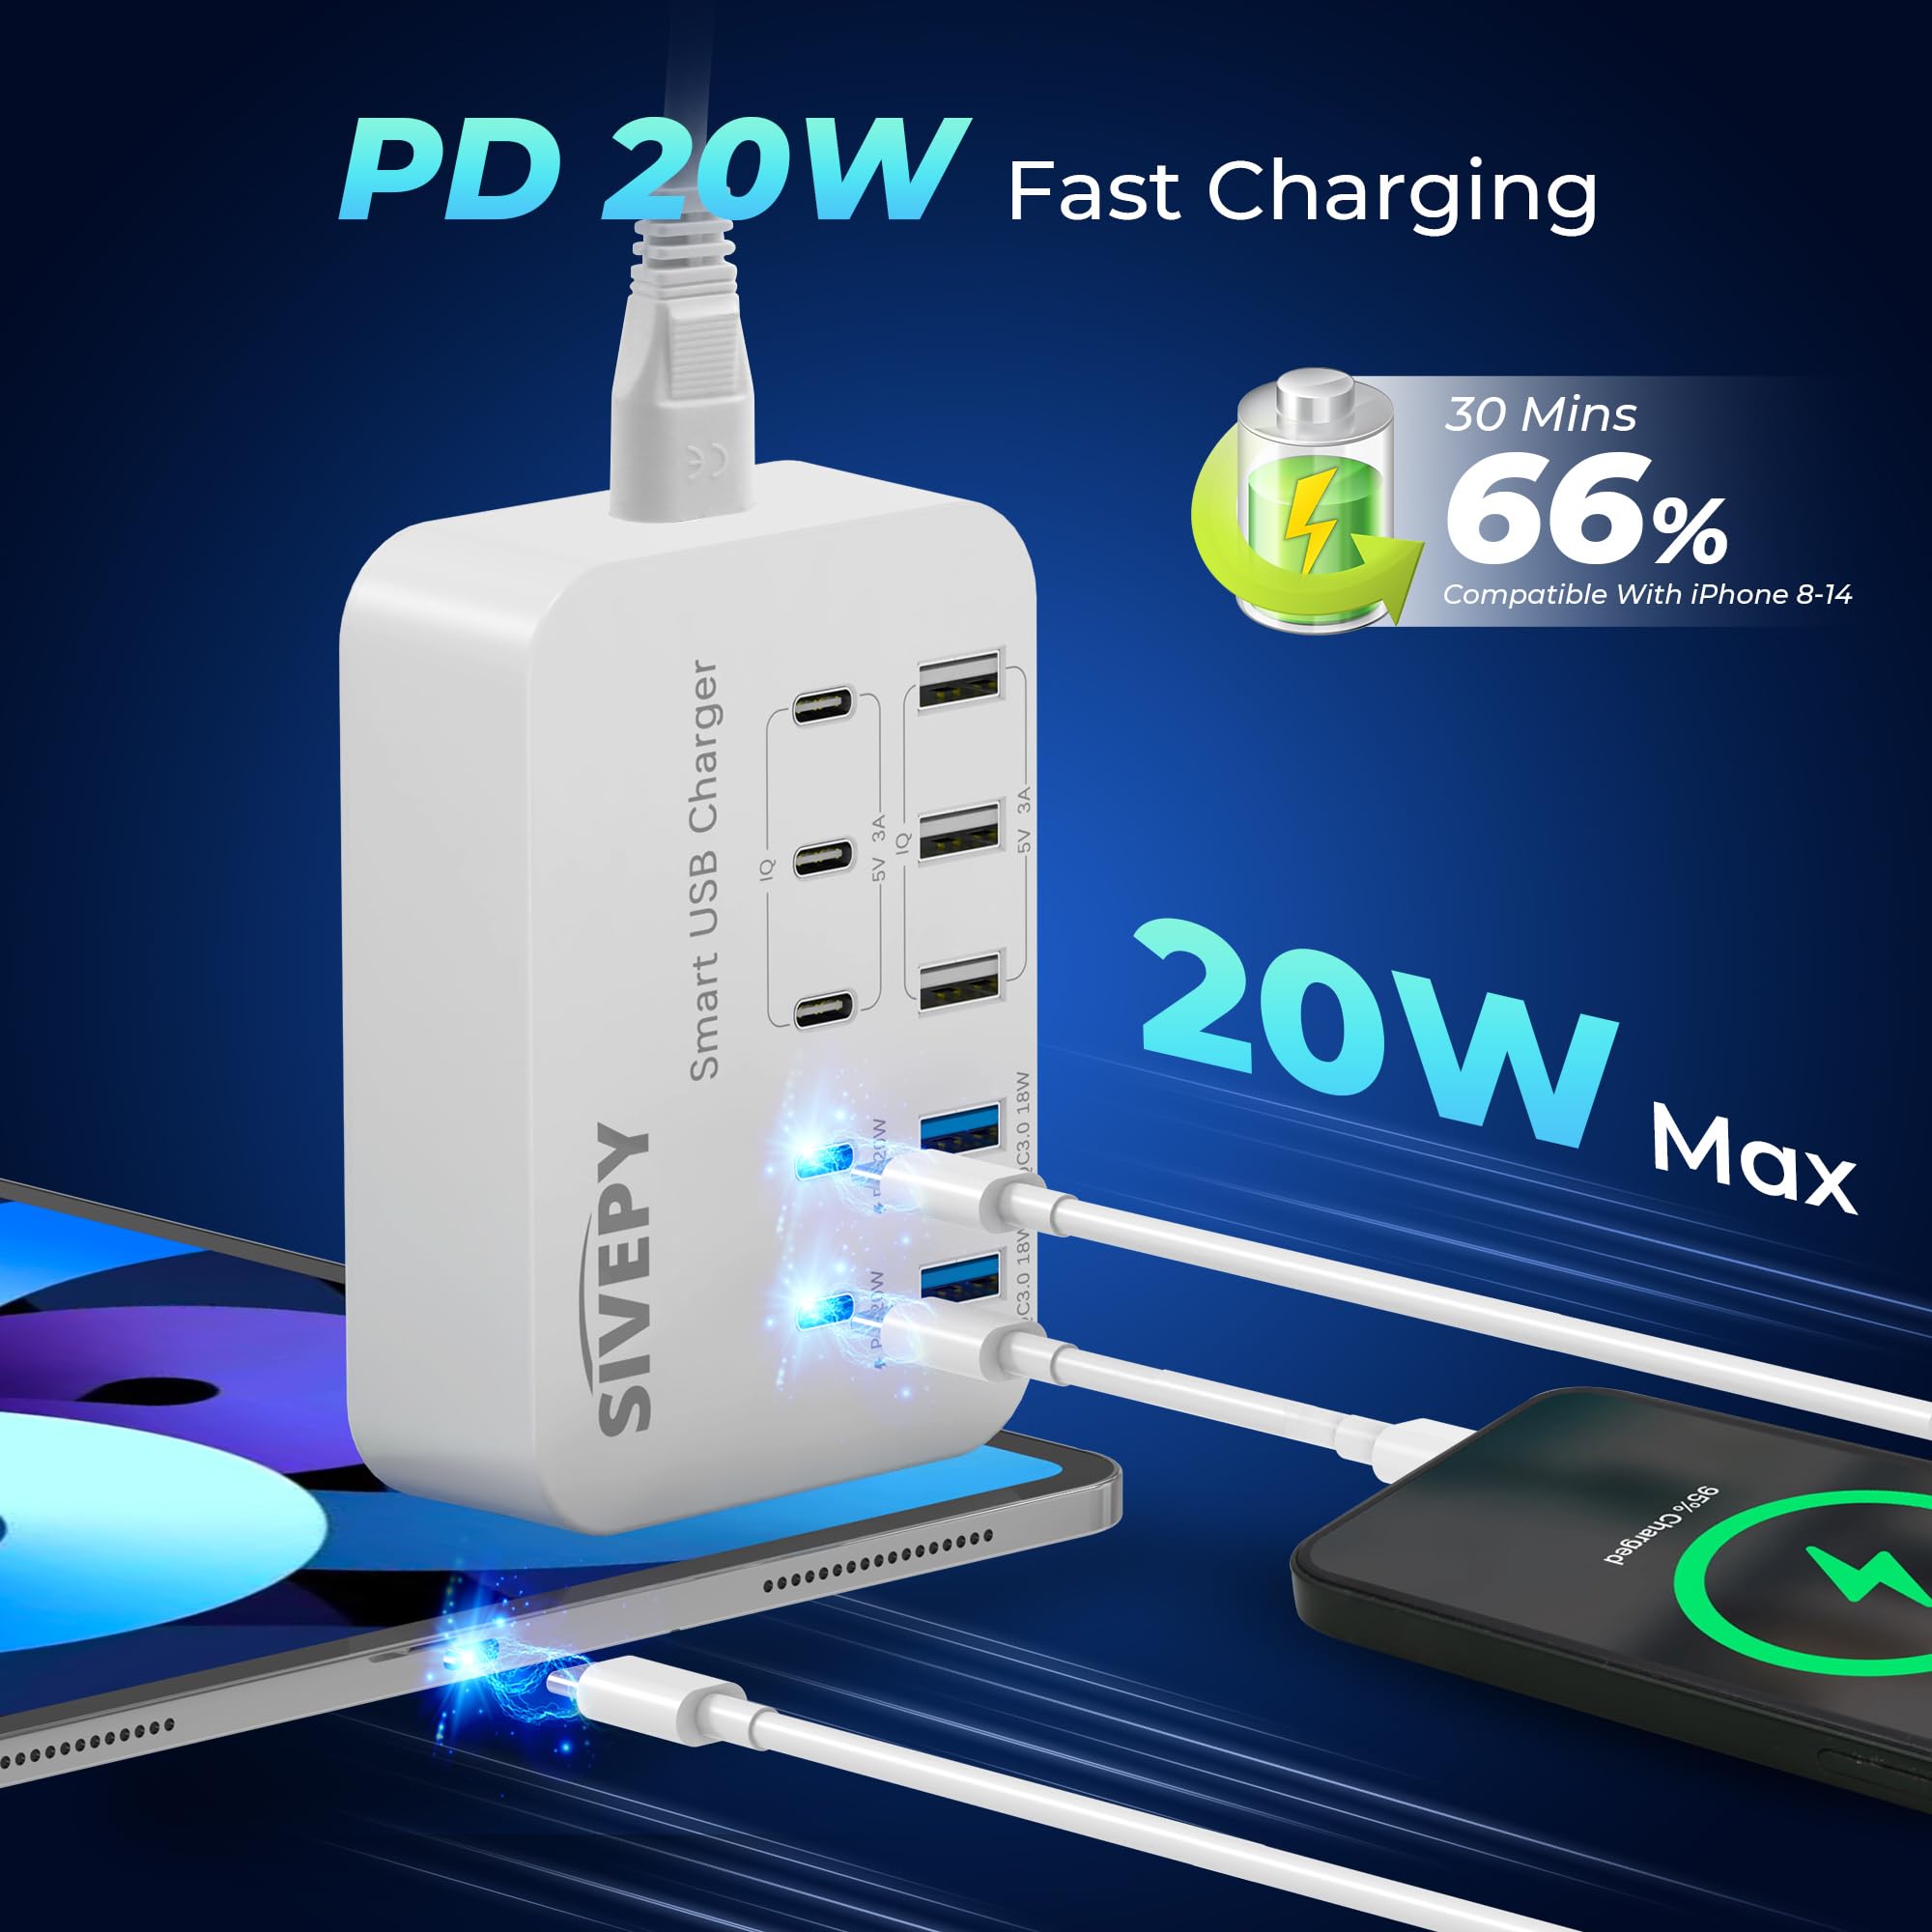 PD20W USB C Charging Station, 106W 10-in-1 Desktop USB C Charger, Surge Protector(4200J), USB Charging Hub Multiport Fast Charging Power Adapter w/ 5ft Extension Cord for iPhone 14, iPad, Galaxy